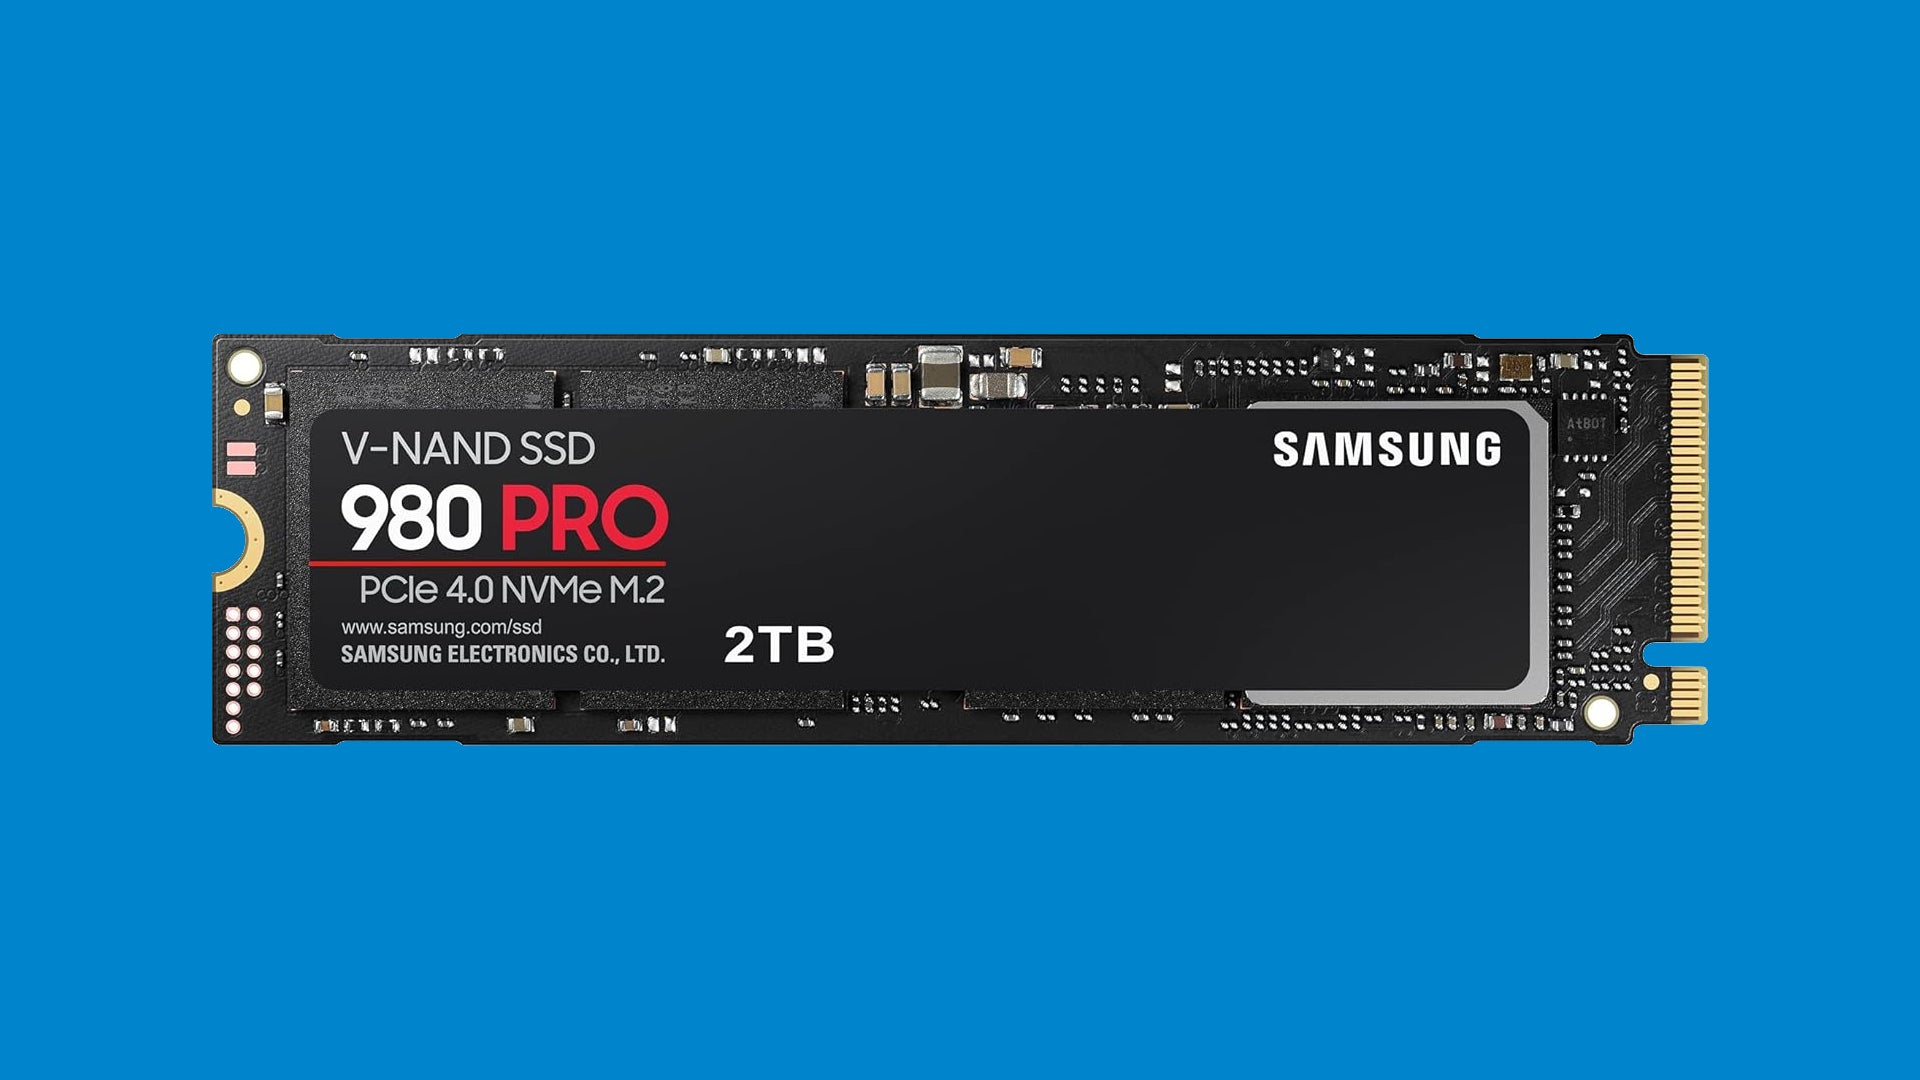 There's a limited-time discount on the 2TB Samsung 980 PRO SSD at 